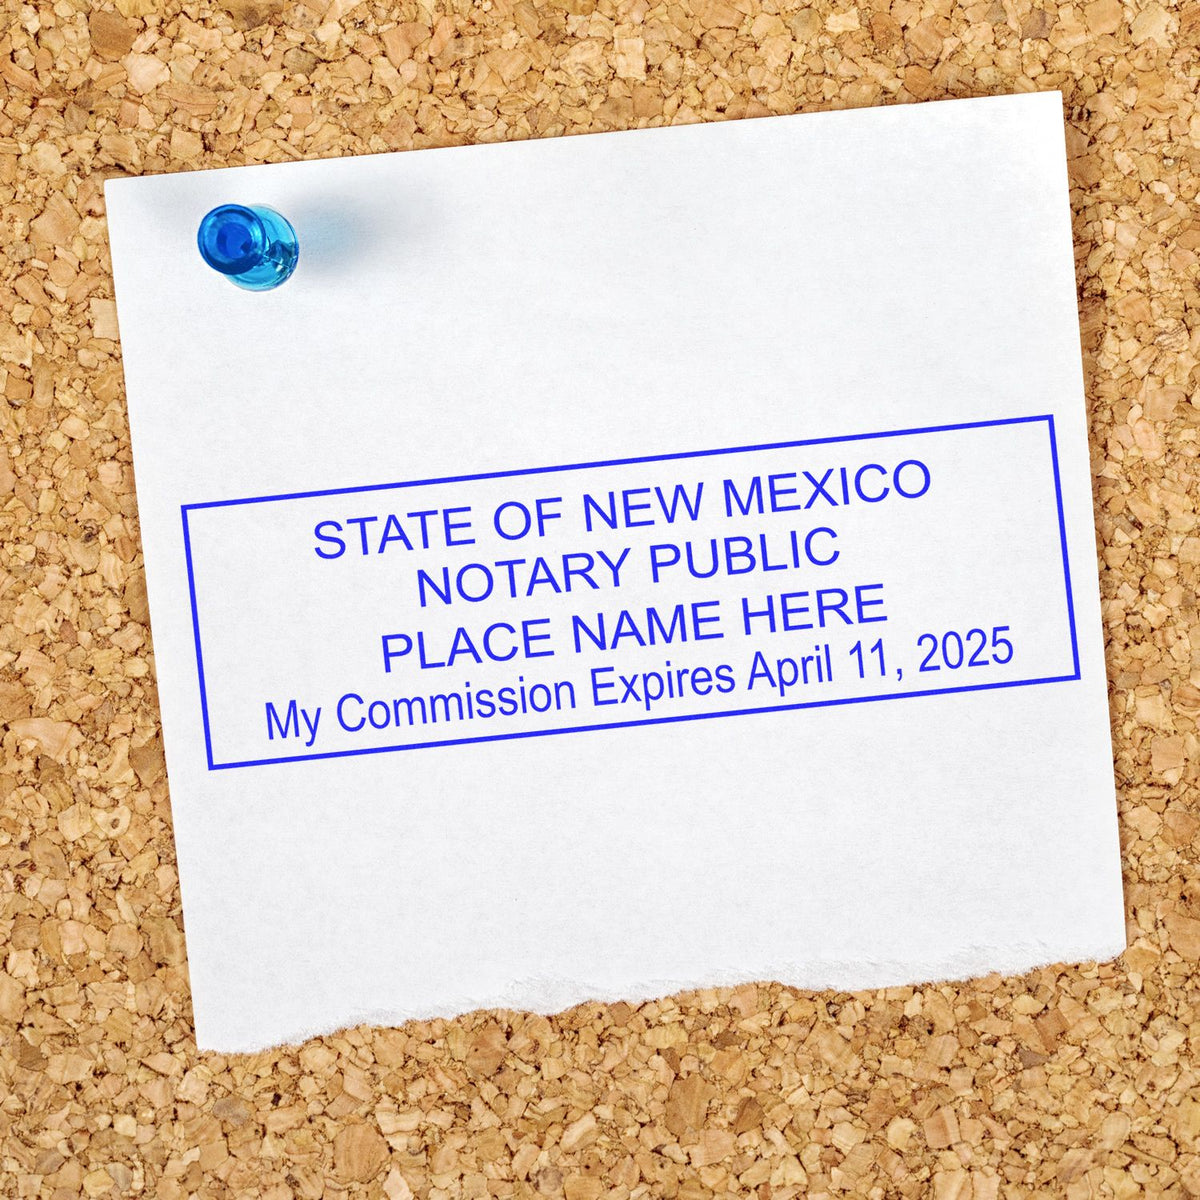 This paper is stamped with a sample imprint of the Wooden Handle New Mexico State Seal Notary Public Stamp, signifying its quality and reliability.